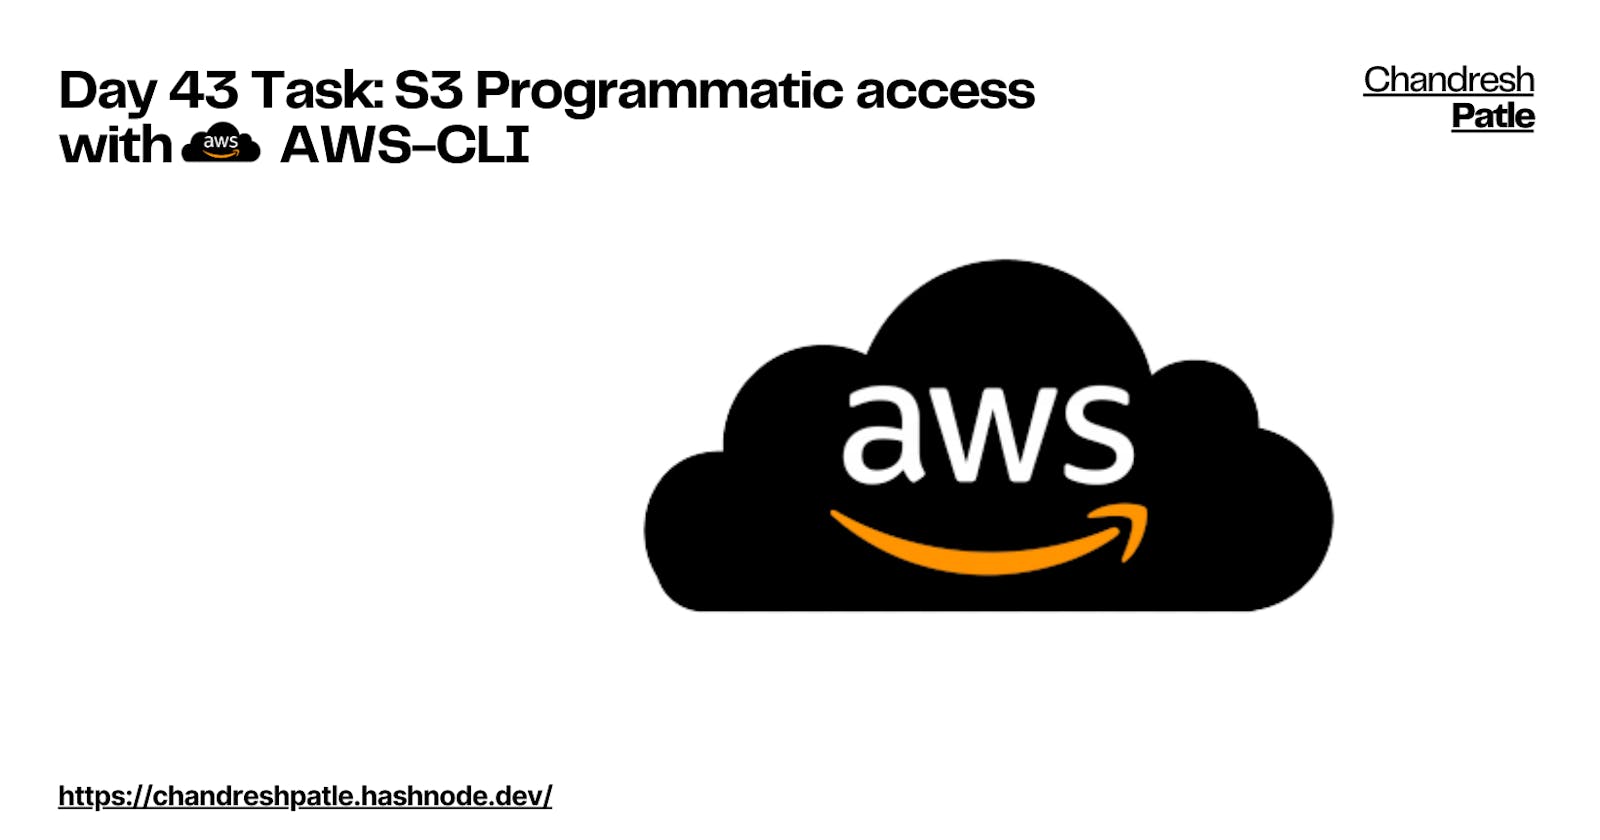 Day 43 Task: S3 Programmatic access with AWS-CLI